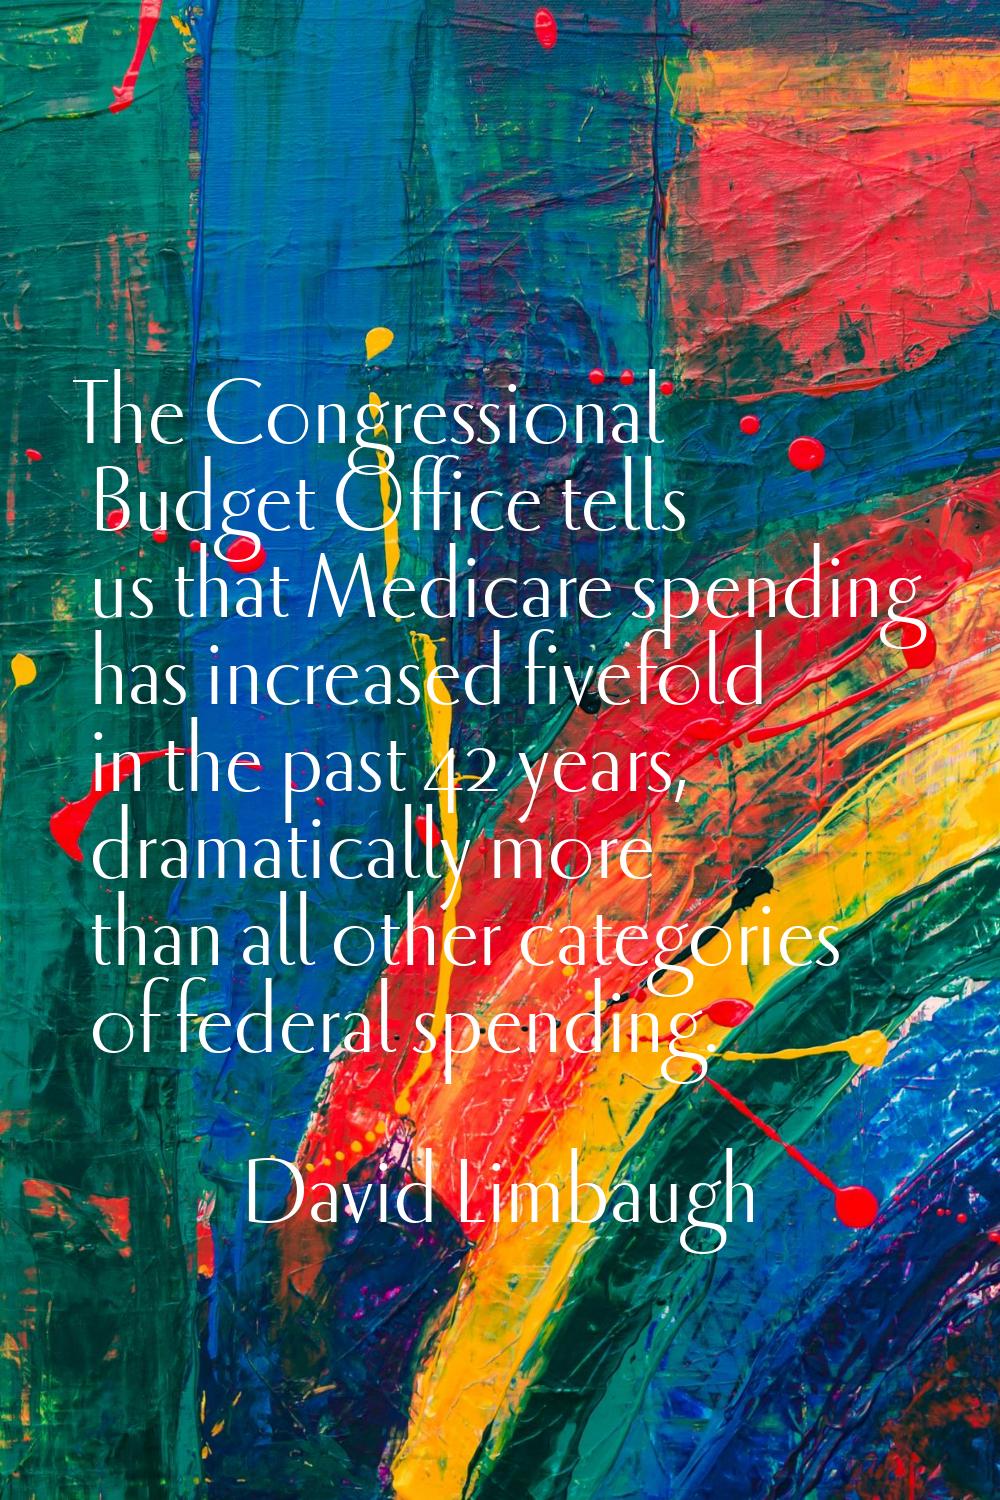 The Congressional Budget Office tells us that Medicare spending has increased fivefold in the past 